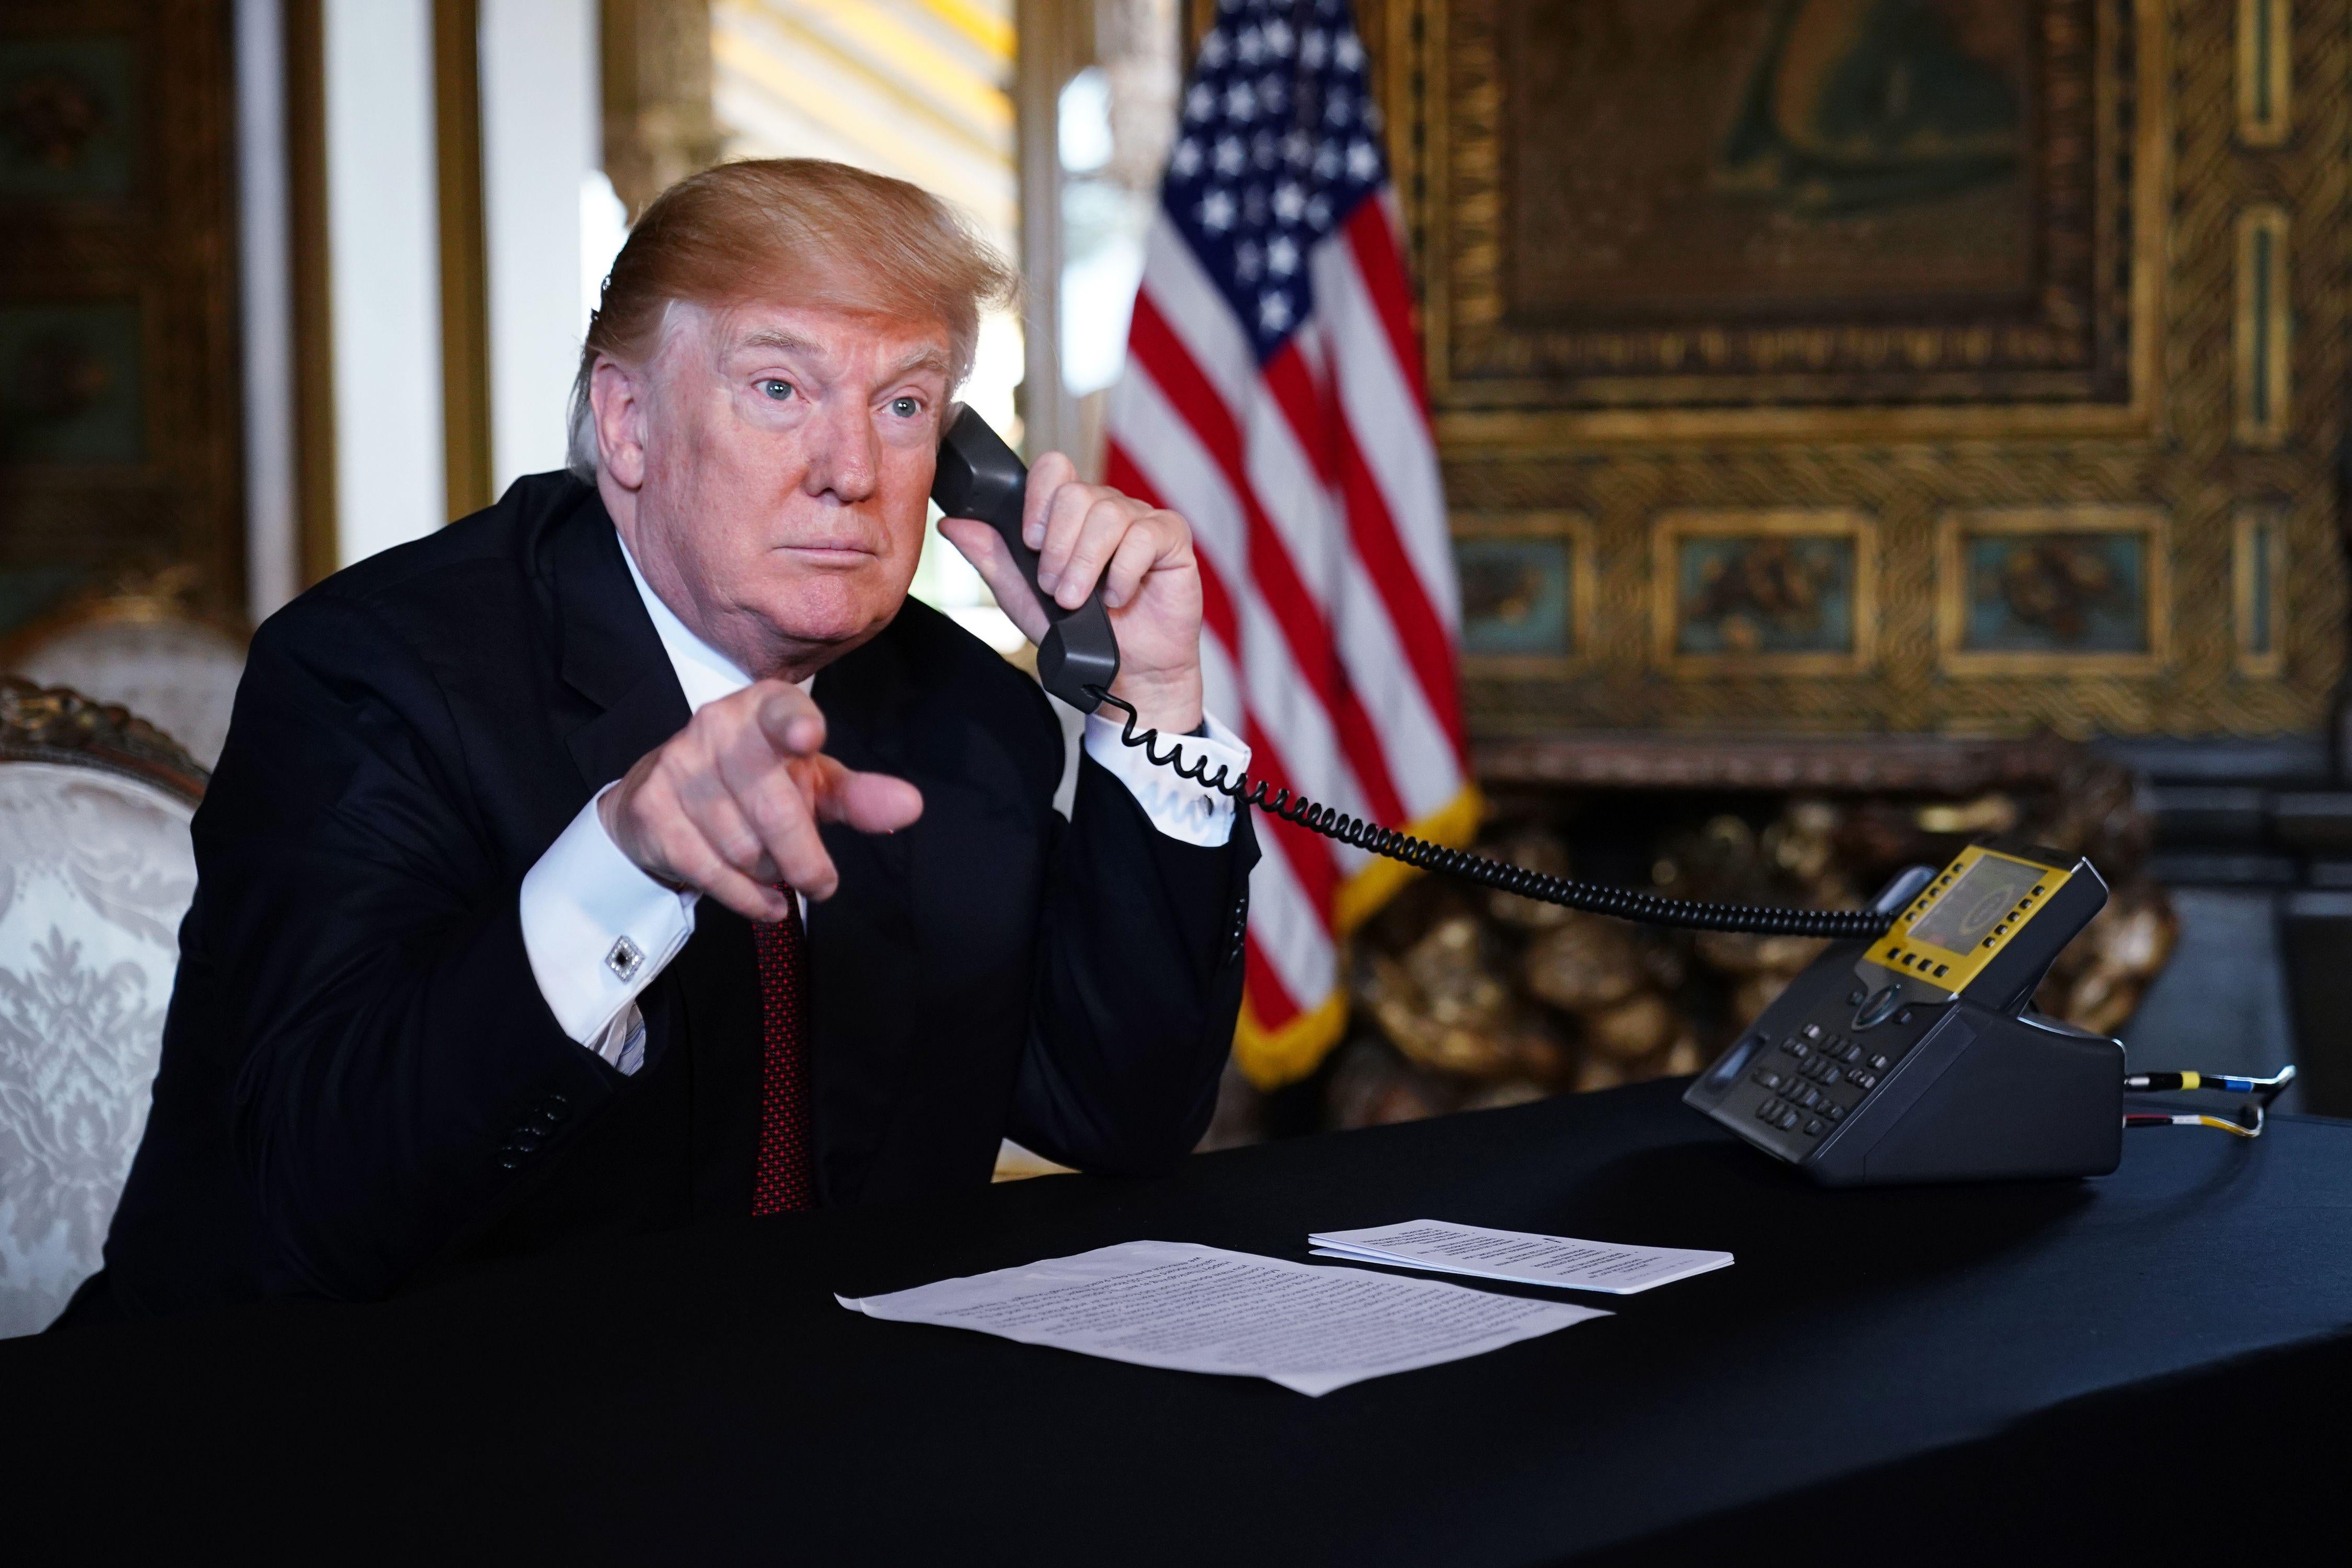 President Donald Trump speaks to members of the military via teleconference from his Mar-a-Lago resort in Palm Beach, Florida, on Thanksgiving Day, November 22, 2018.